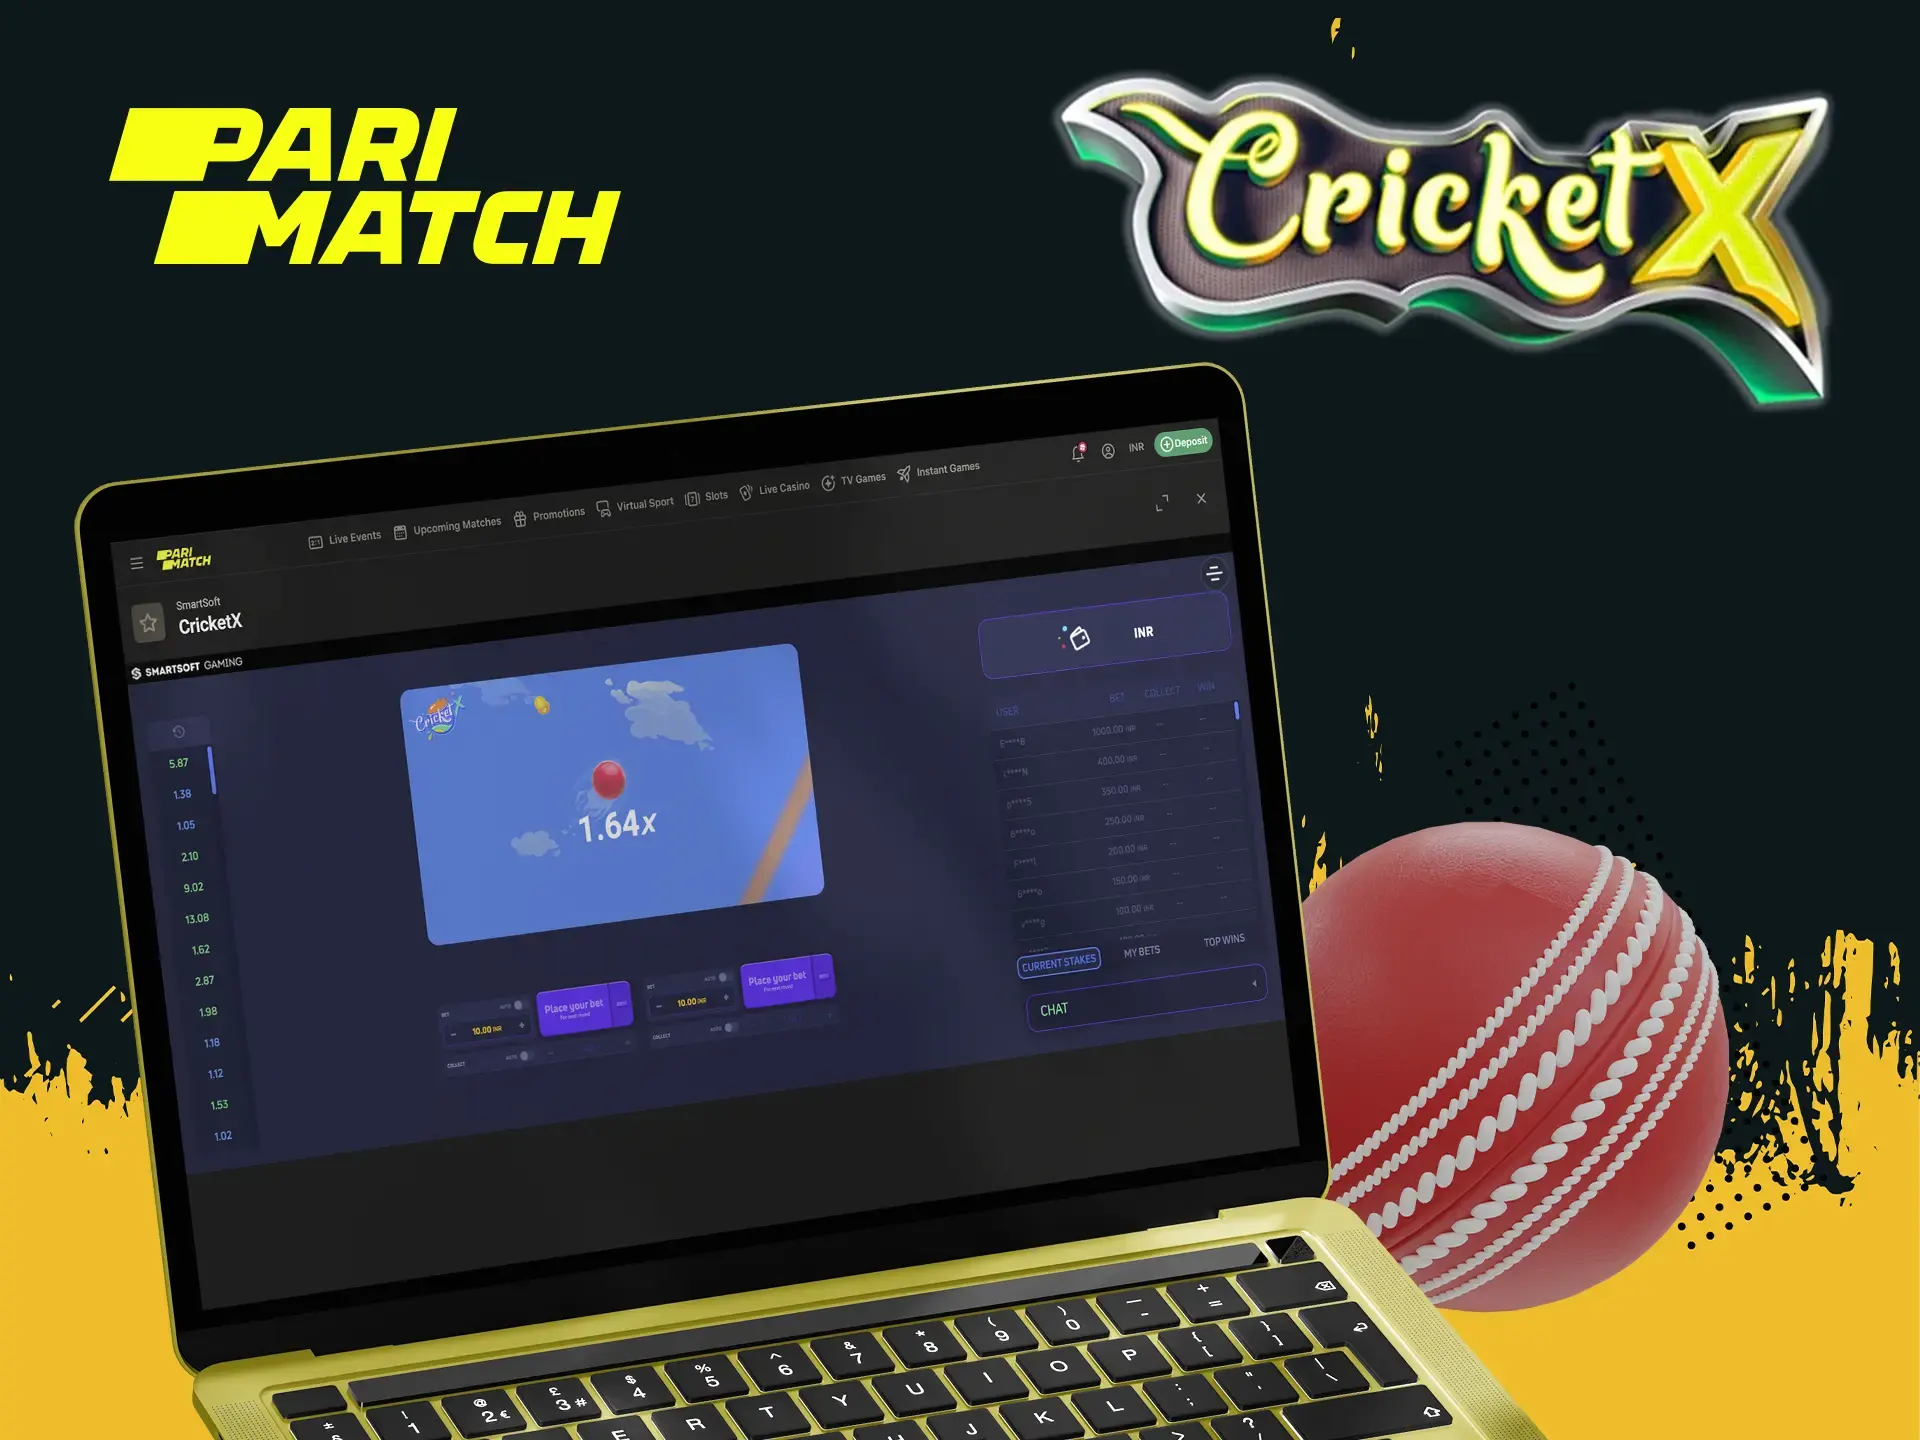 Try your luck and strength in Parimatch's popular Cricket X crash game.